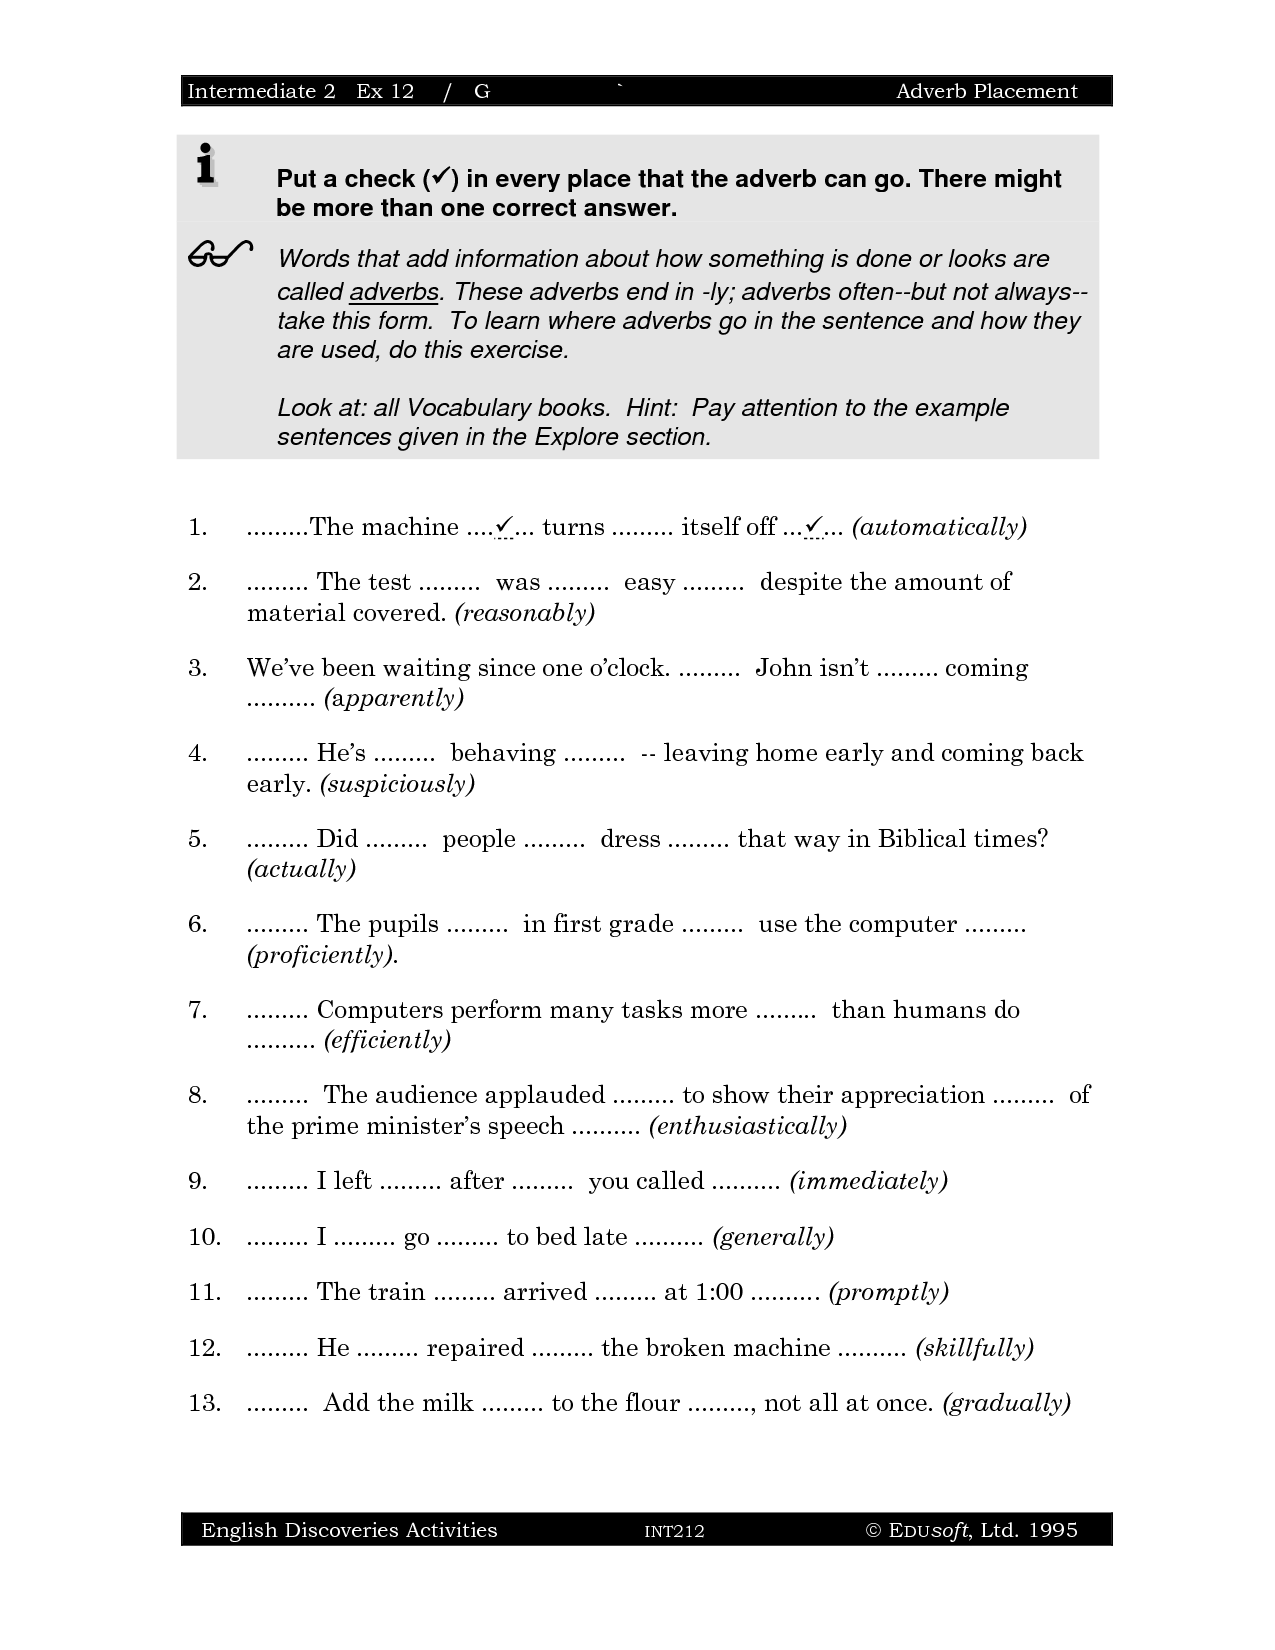 14-best-images-of-12th-grade-english-worksheets-8-grade-english-worksheets-12th-grade-math